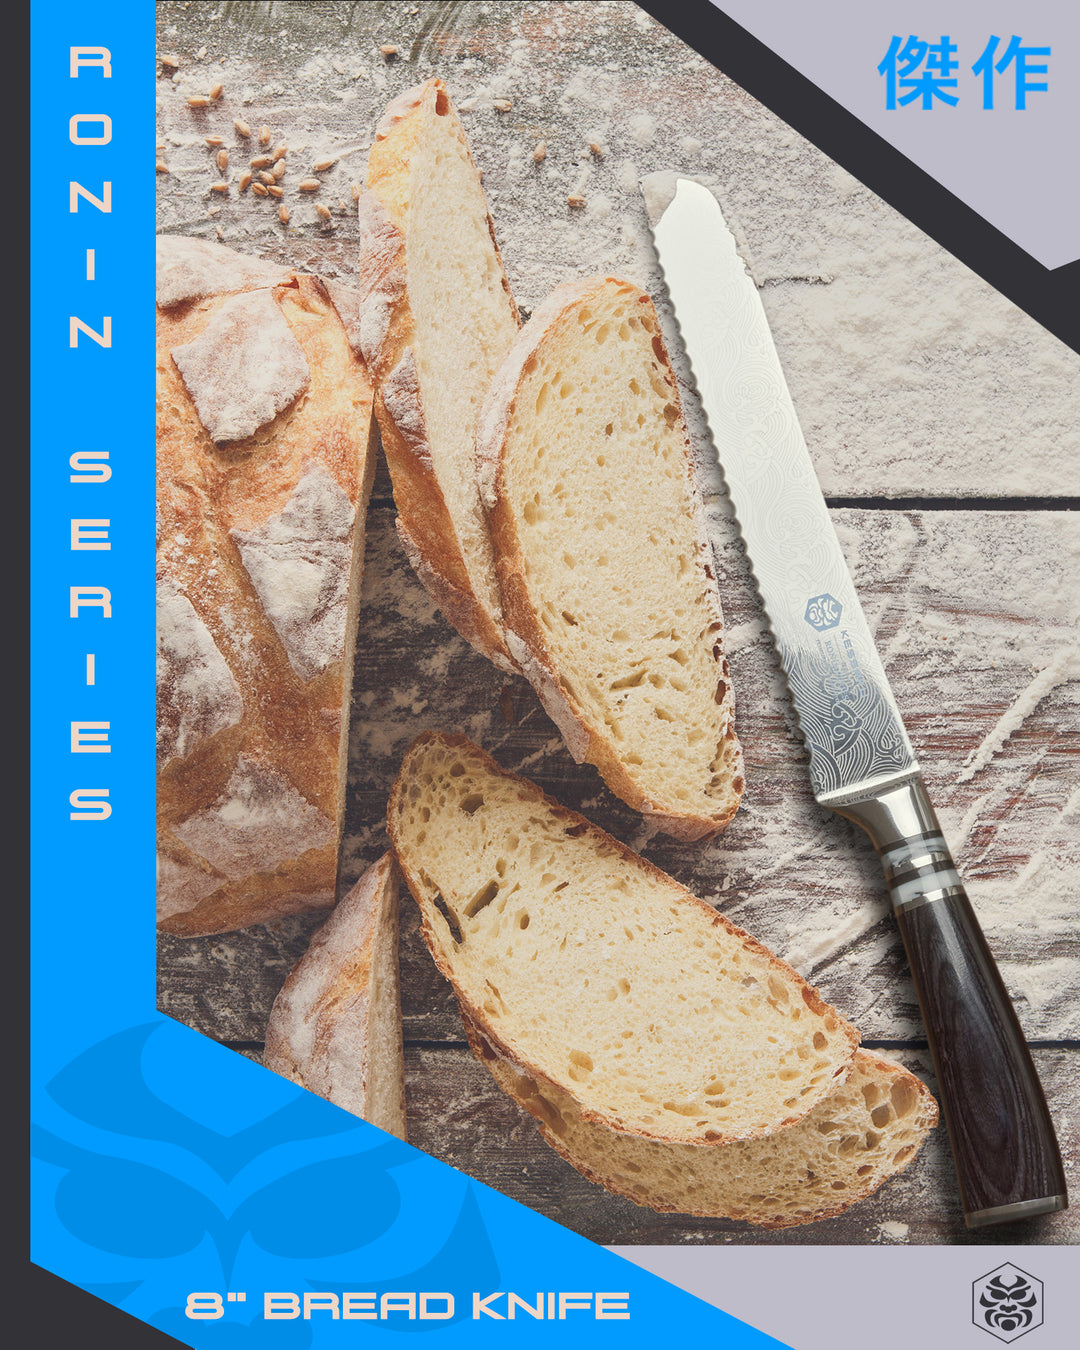 The Ronin Bread knife and thick slices of bread over flower and grains